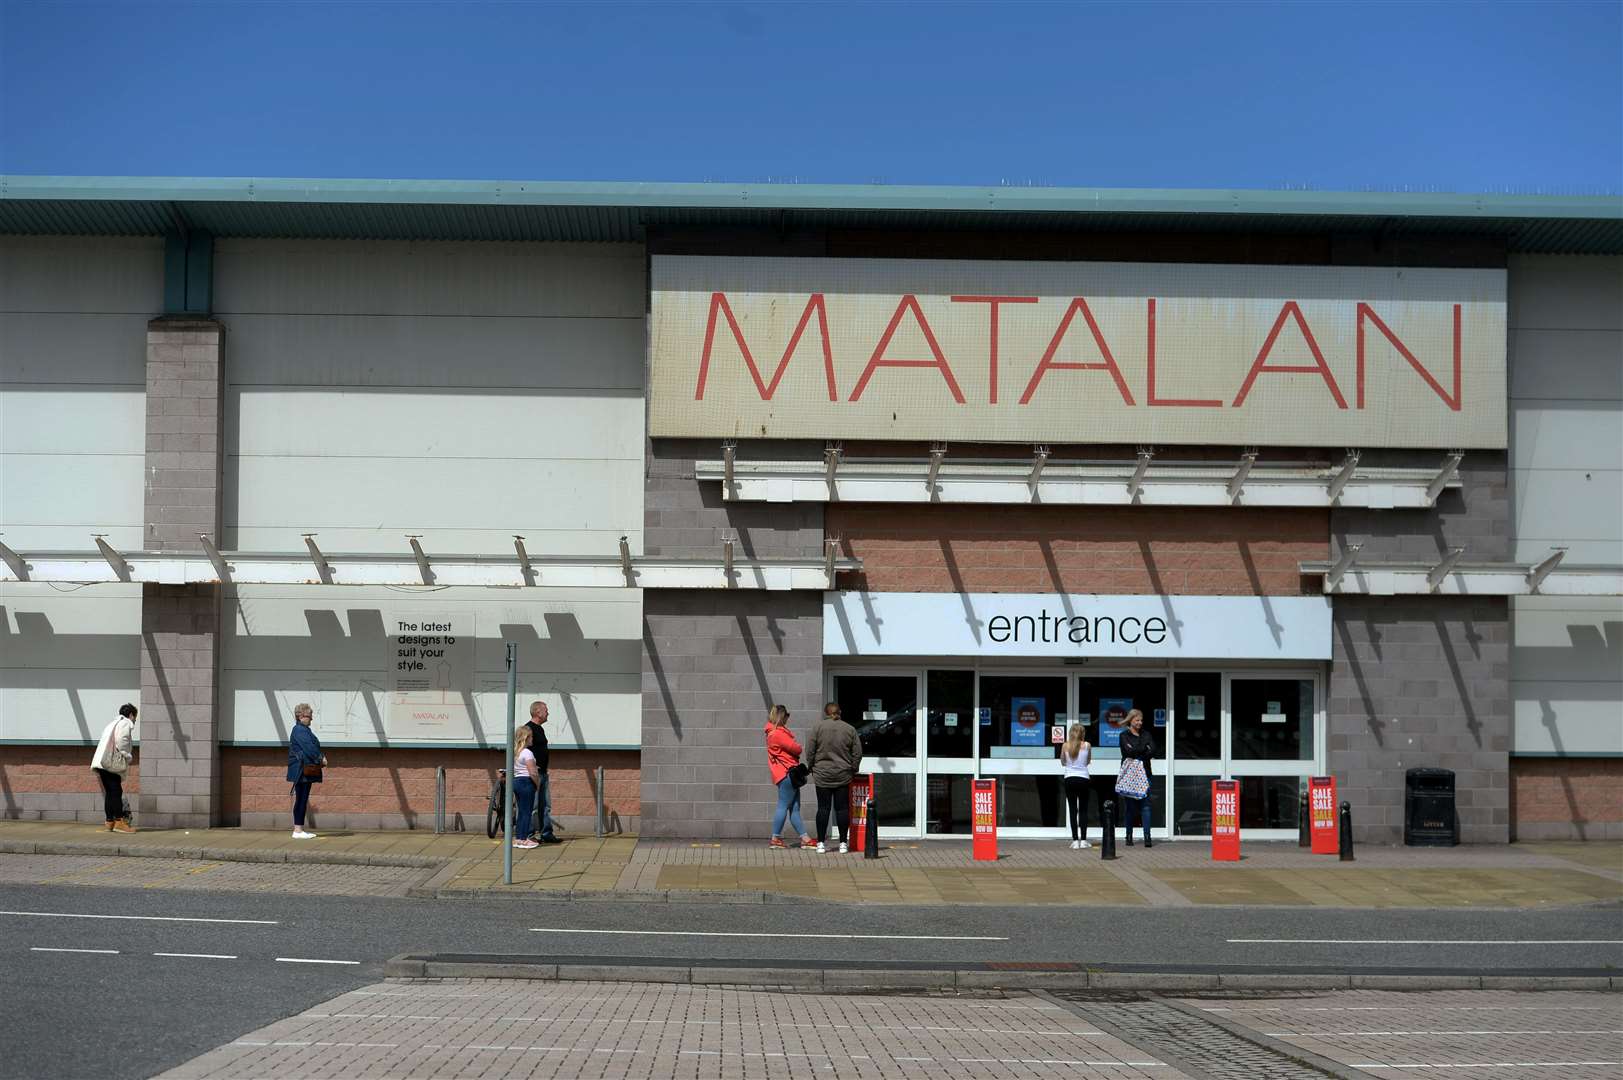 Customers were queuing outside Matalan in Inverness which has now reopened.